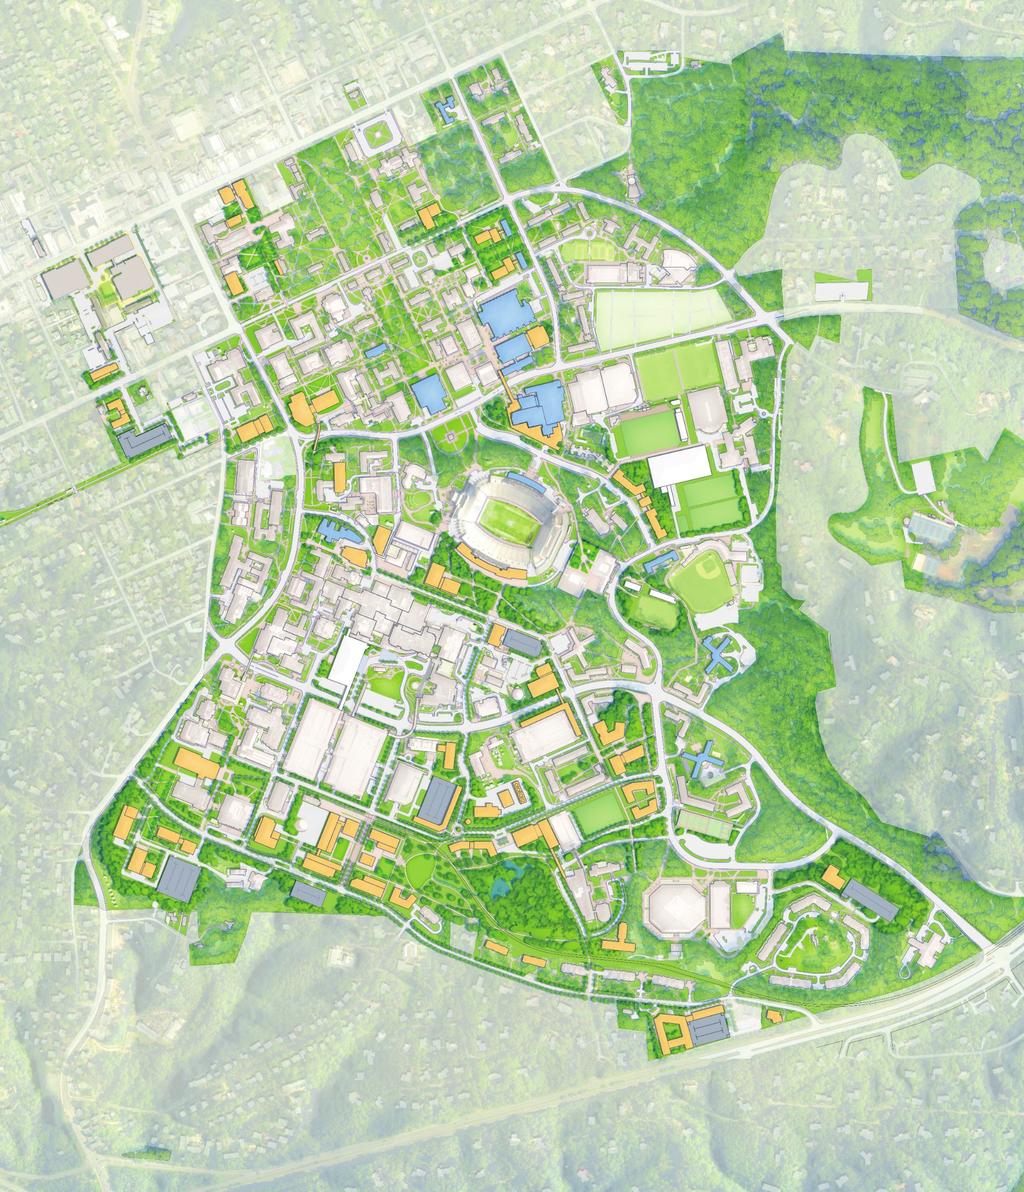 UNC CAMPUS MASTER PLAN CONCEPT D RA FT Any new transit-oriented development in this station area is contingent on the University of North Carolina at Chapel Hill Campus Master Plan h Source: UNC